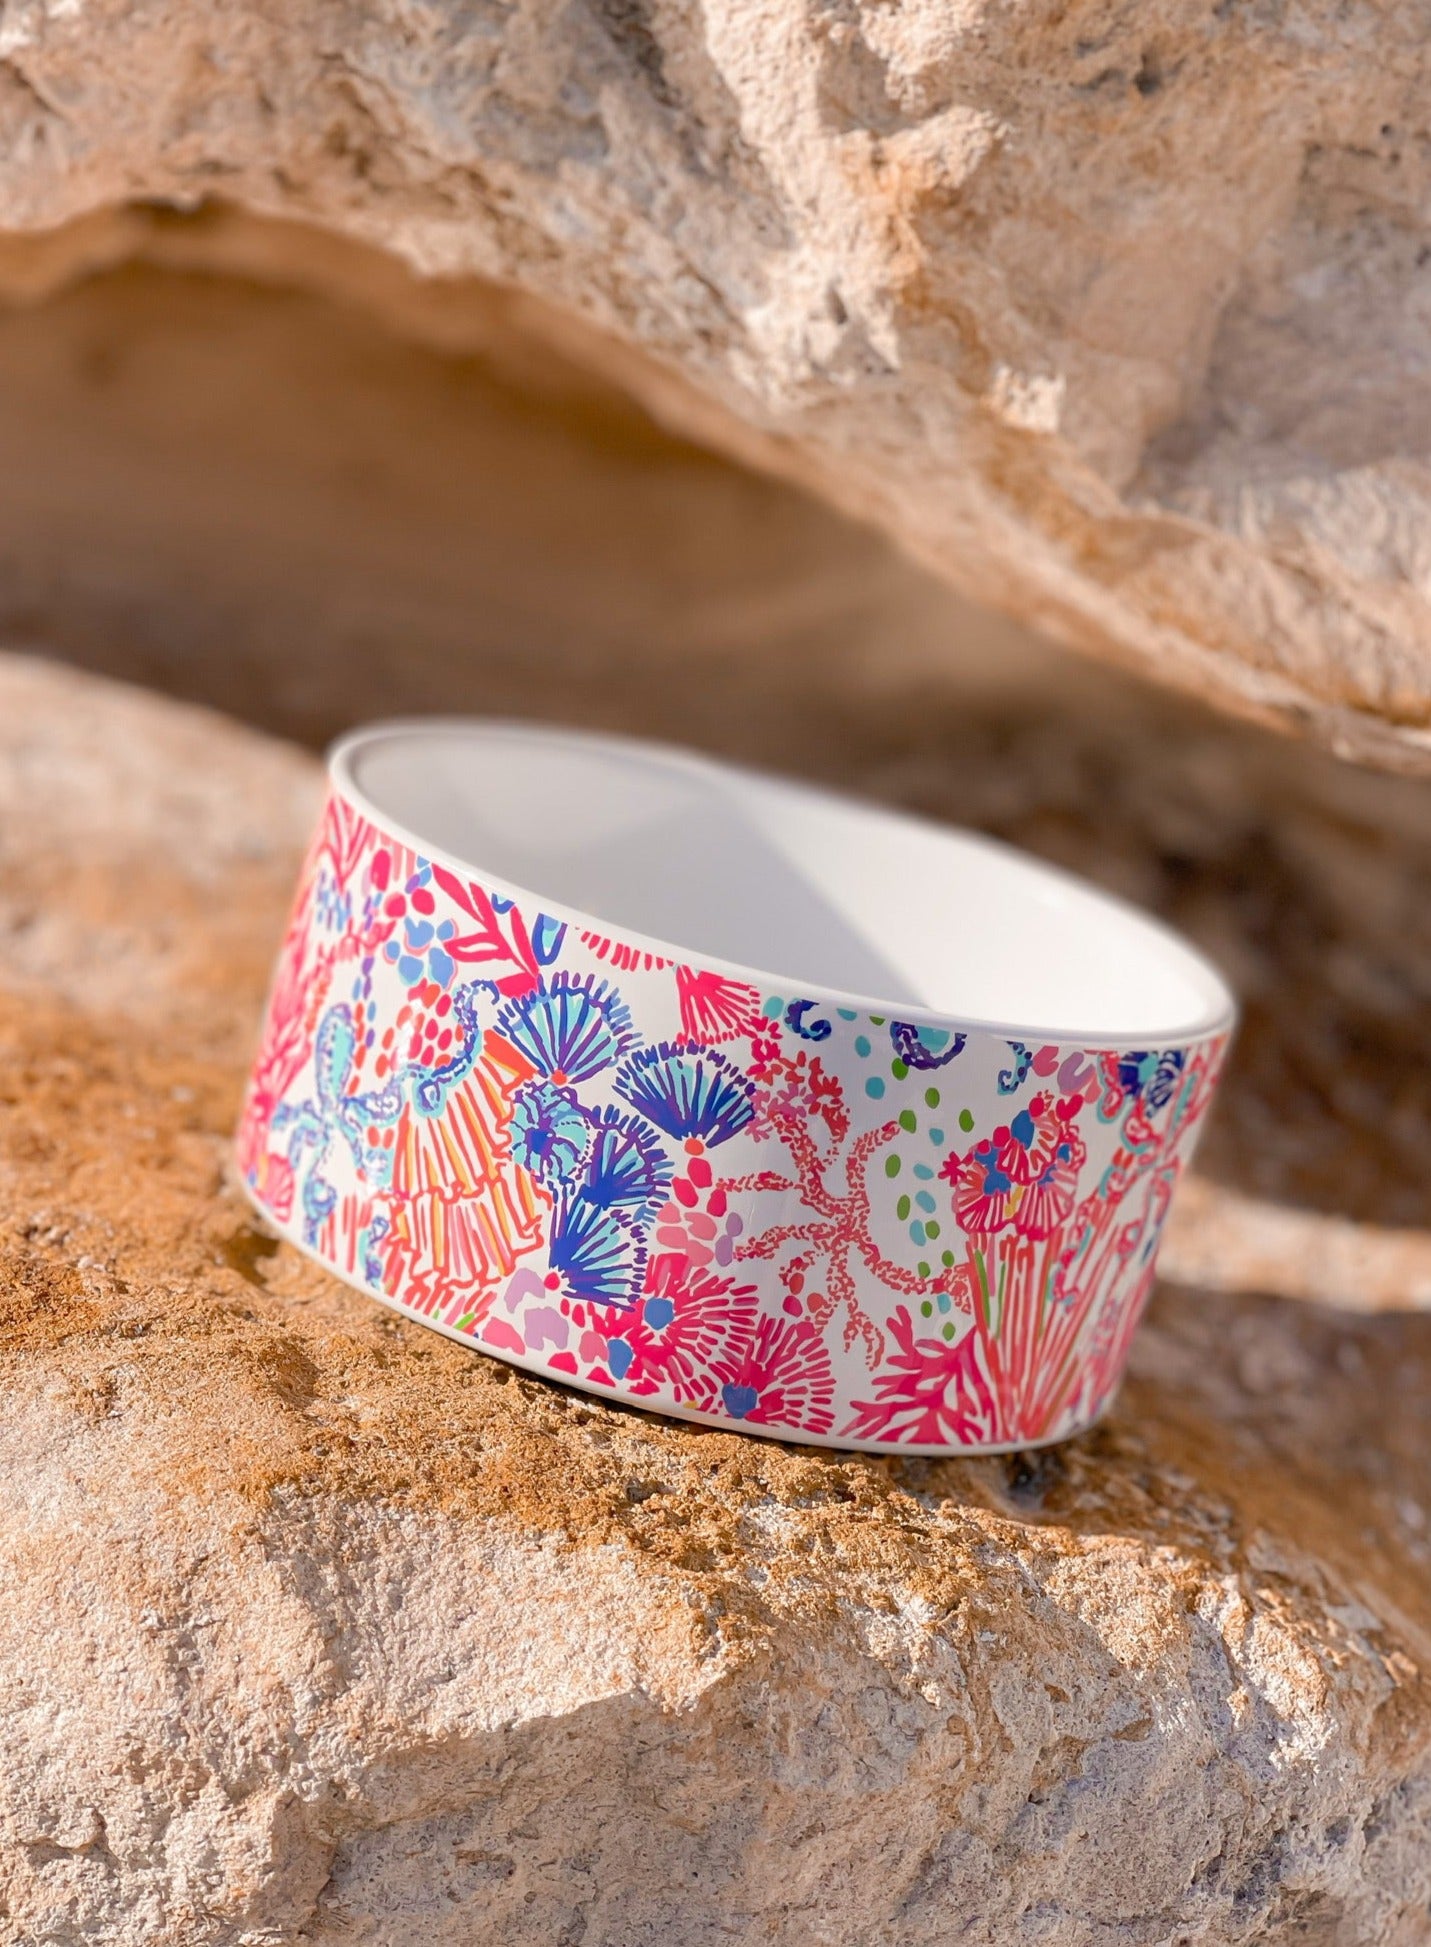 Dog Bowl by Lilly Pulitzer - Splendor in the Sand